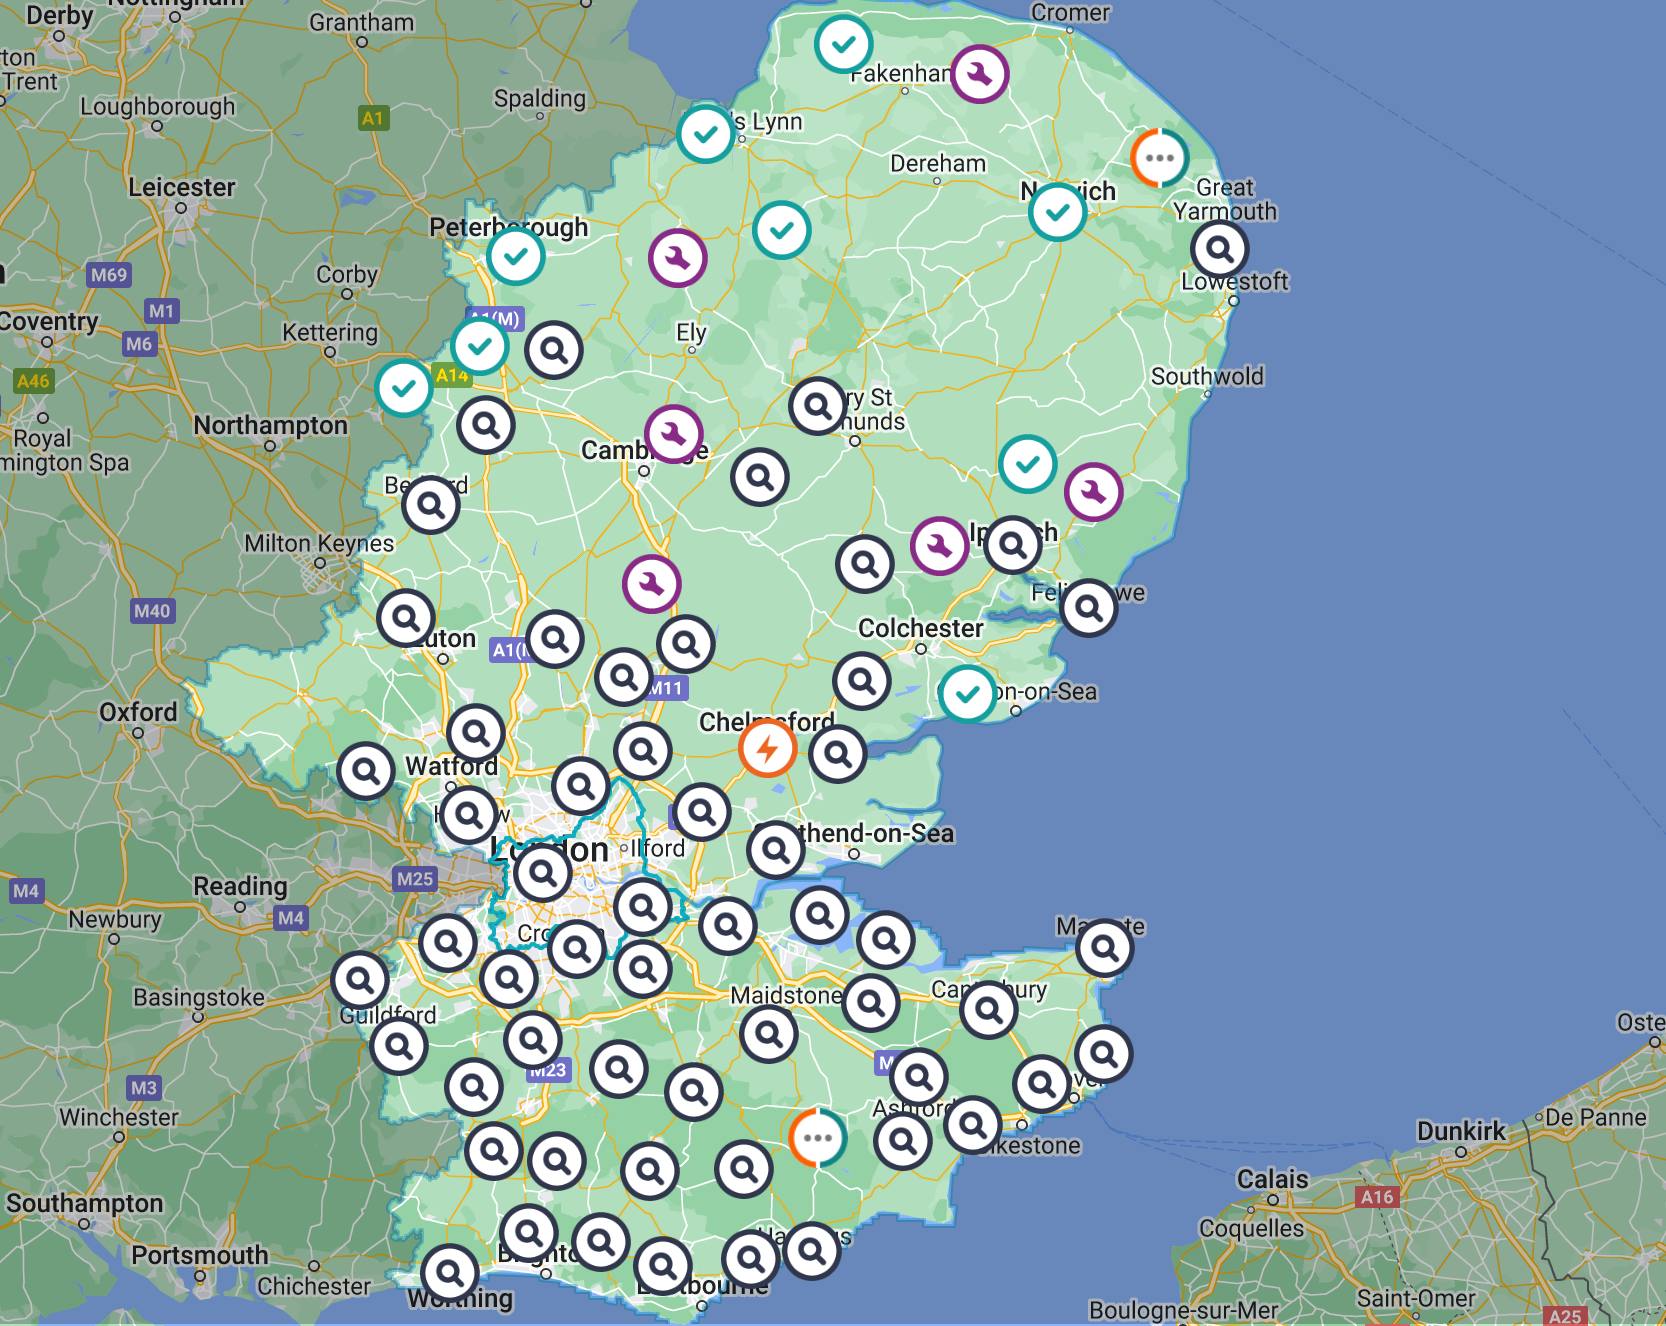 Map showing live power outages across UK